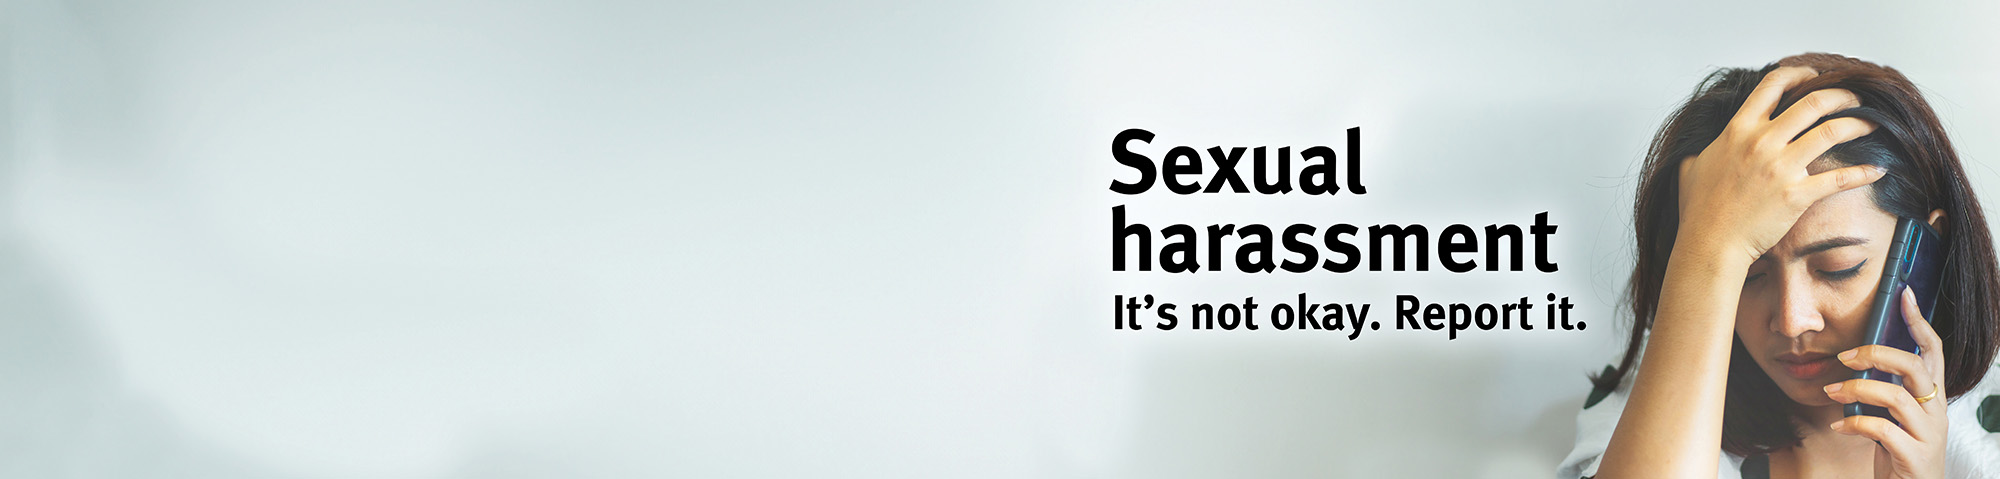 RSHQ Sexual assault and sexual harassment banner 